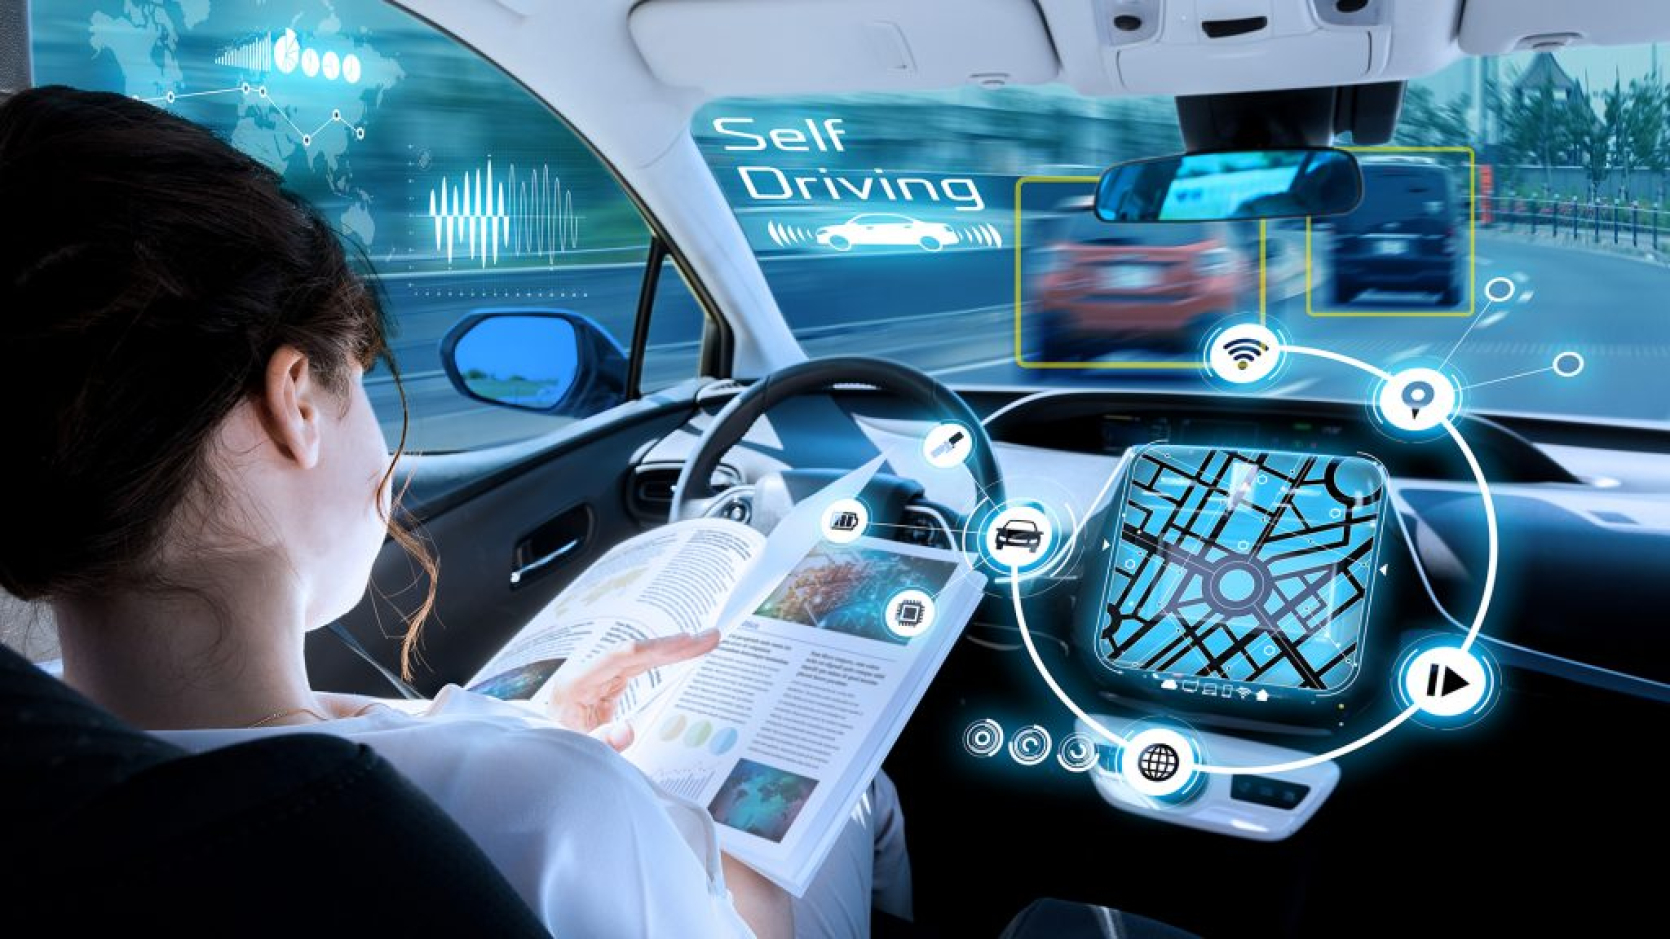 AUTONOMOUS VEHICLES MADE SAFE WITH FIRST ETHICAL ALGORITHM